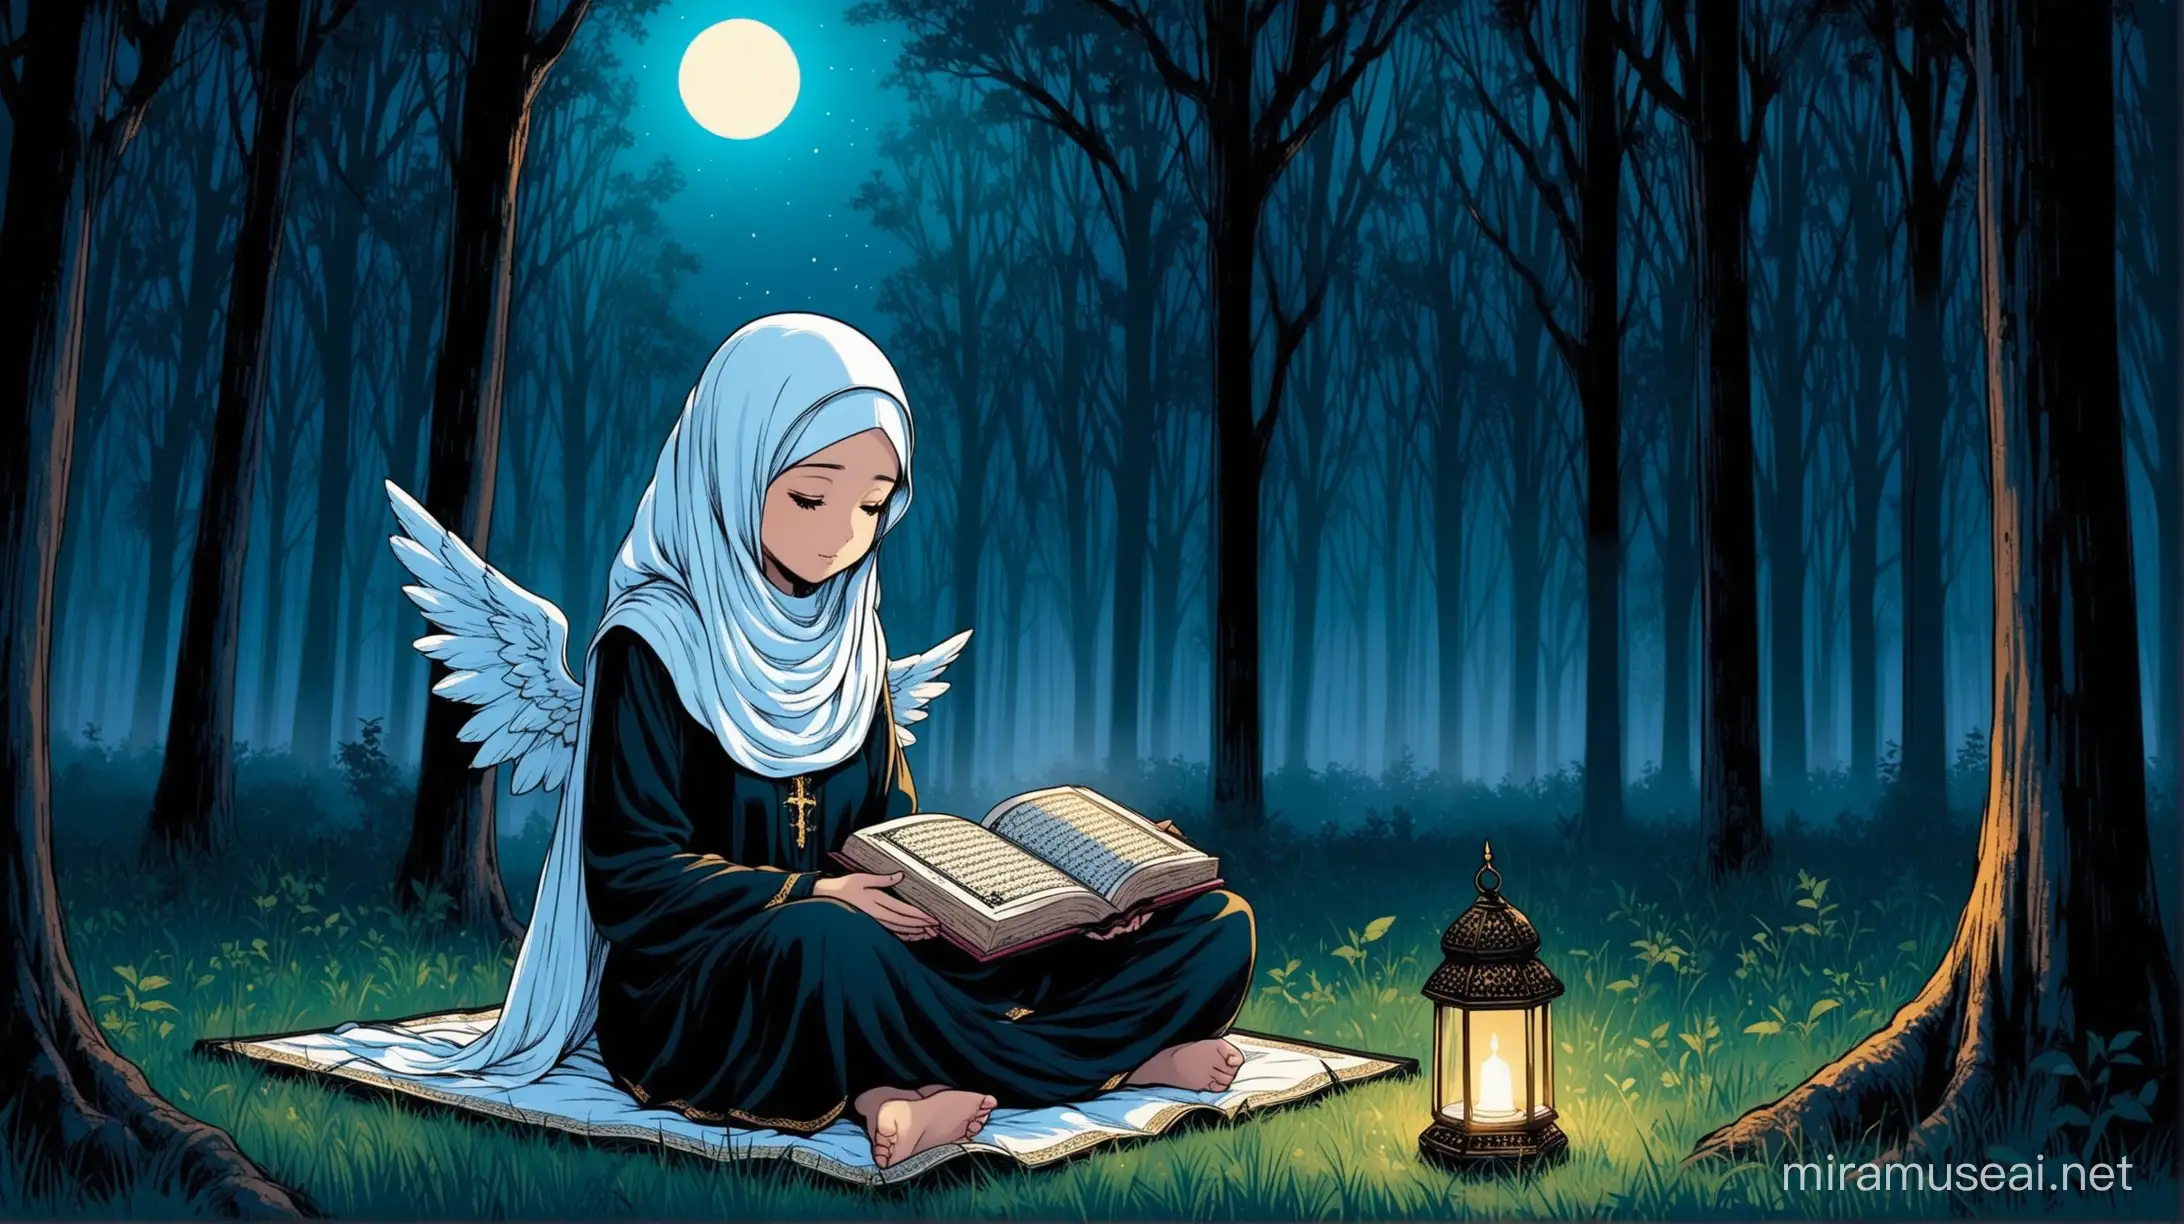 ' if her hair is not visible', the covered girl reads the Quran in the forest at night with her blue and black outfit and there is an angel behind her.
